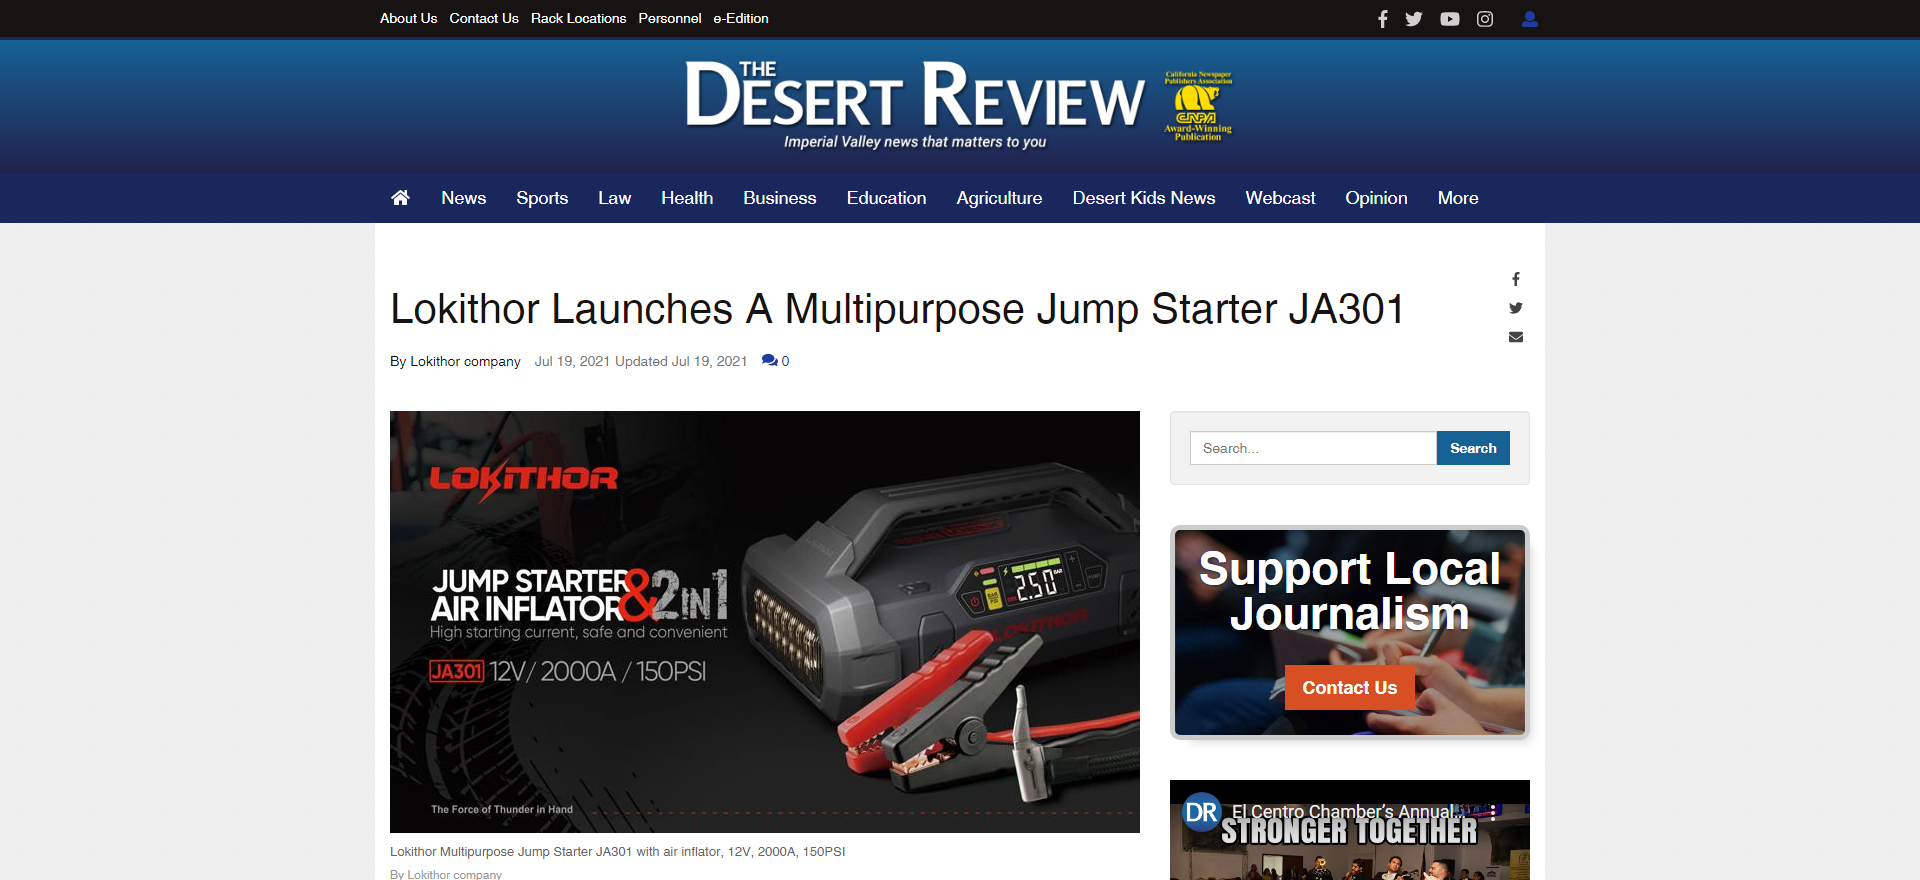 Lokithor Launches A Multipurpose Jump Starter JA301 - State - thedese_ - www.thedesertreview.com